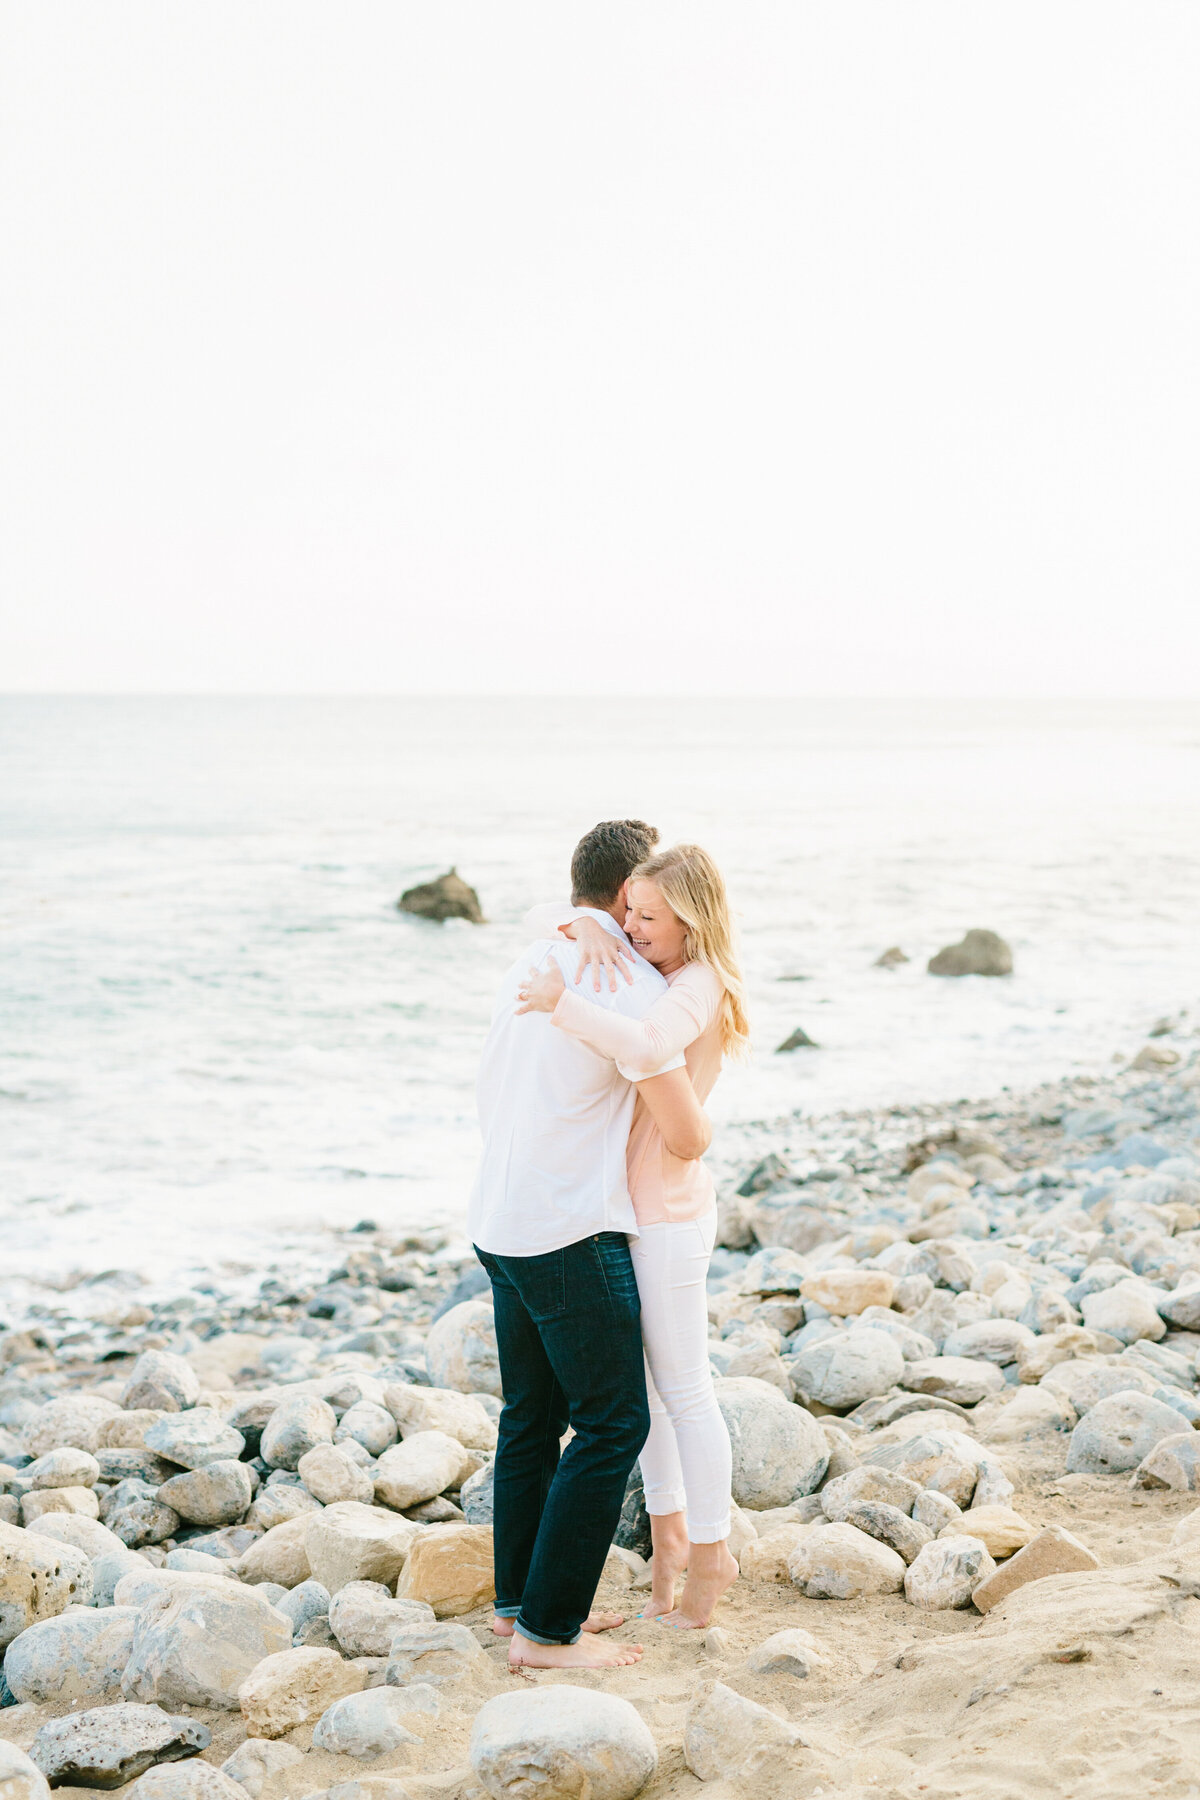 Best California and Texas Engagement Photographer-Jodee Debes Photography-60